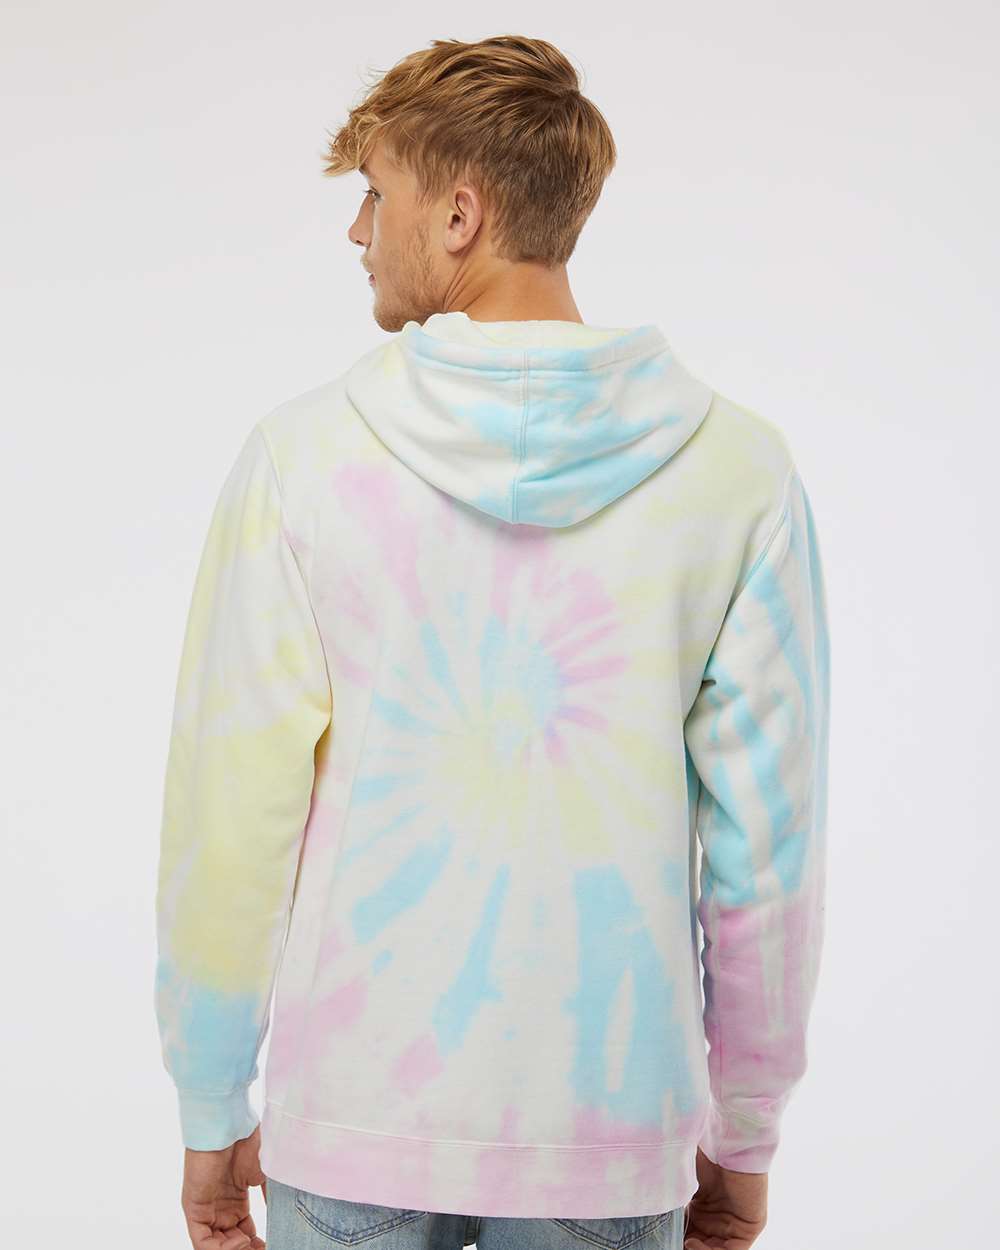 Independent Trading Co. Unisex Midweight Tie-Dyed Hooded Sweatshirt PRM4500TD #colormdl_Tie Dye Sunset Swirl